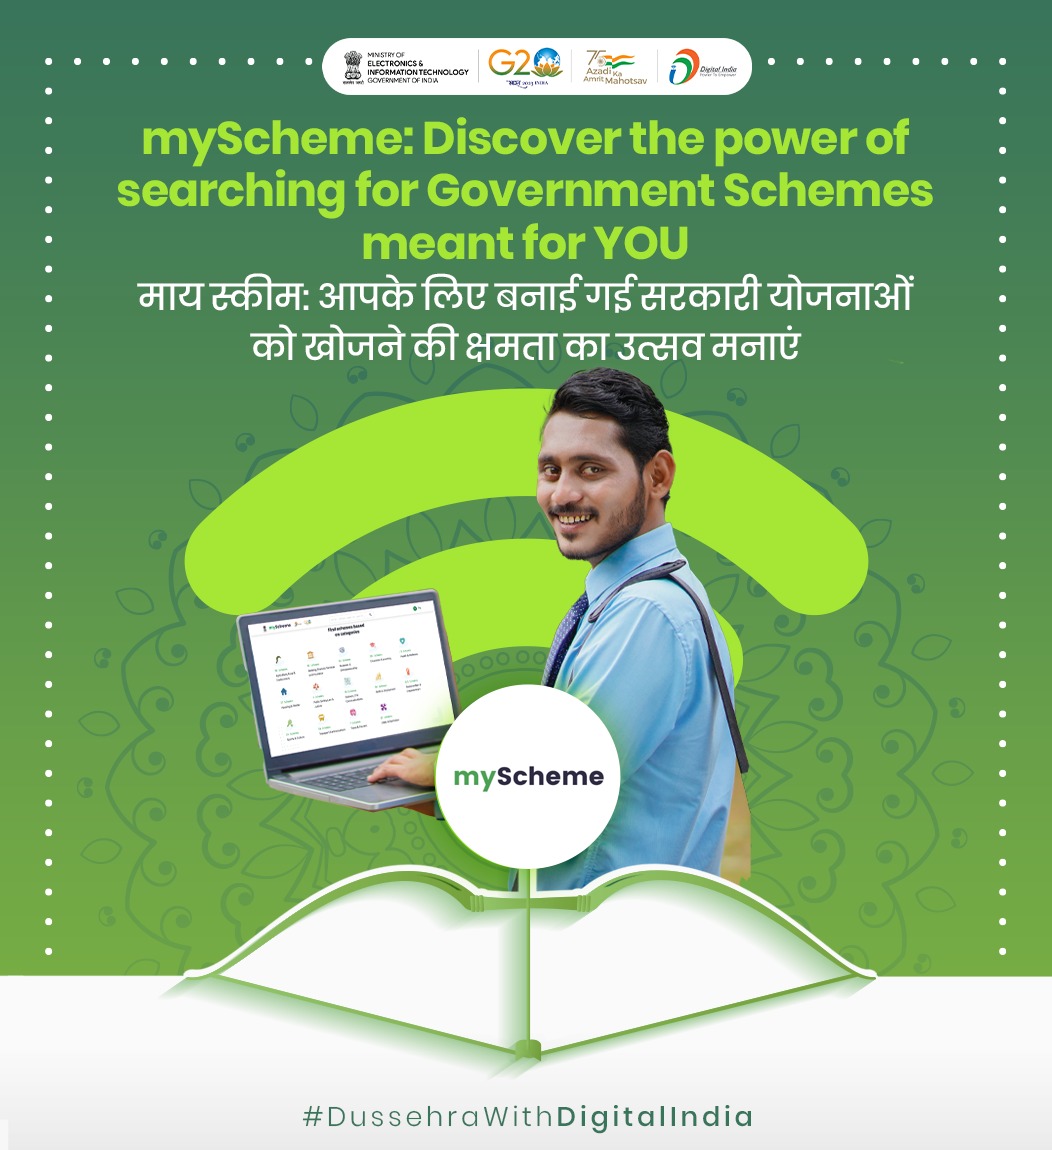 Service discovery platform that envisages providing a reliable, secure & trusted portal for schemes, #myScheme aims to offer a one-stop search wherein users can find schemes that they are eligible for. #DussehraWithDigitalIndia Visit: myscheme.gov.in